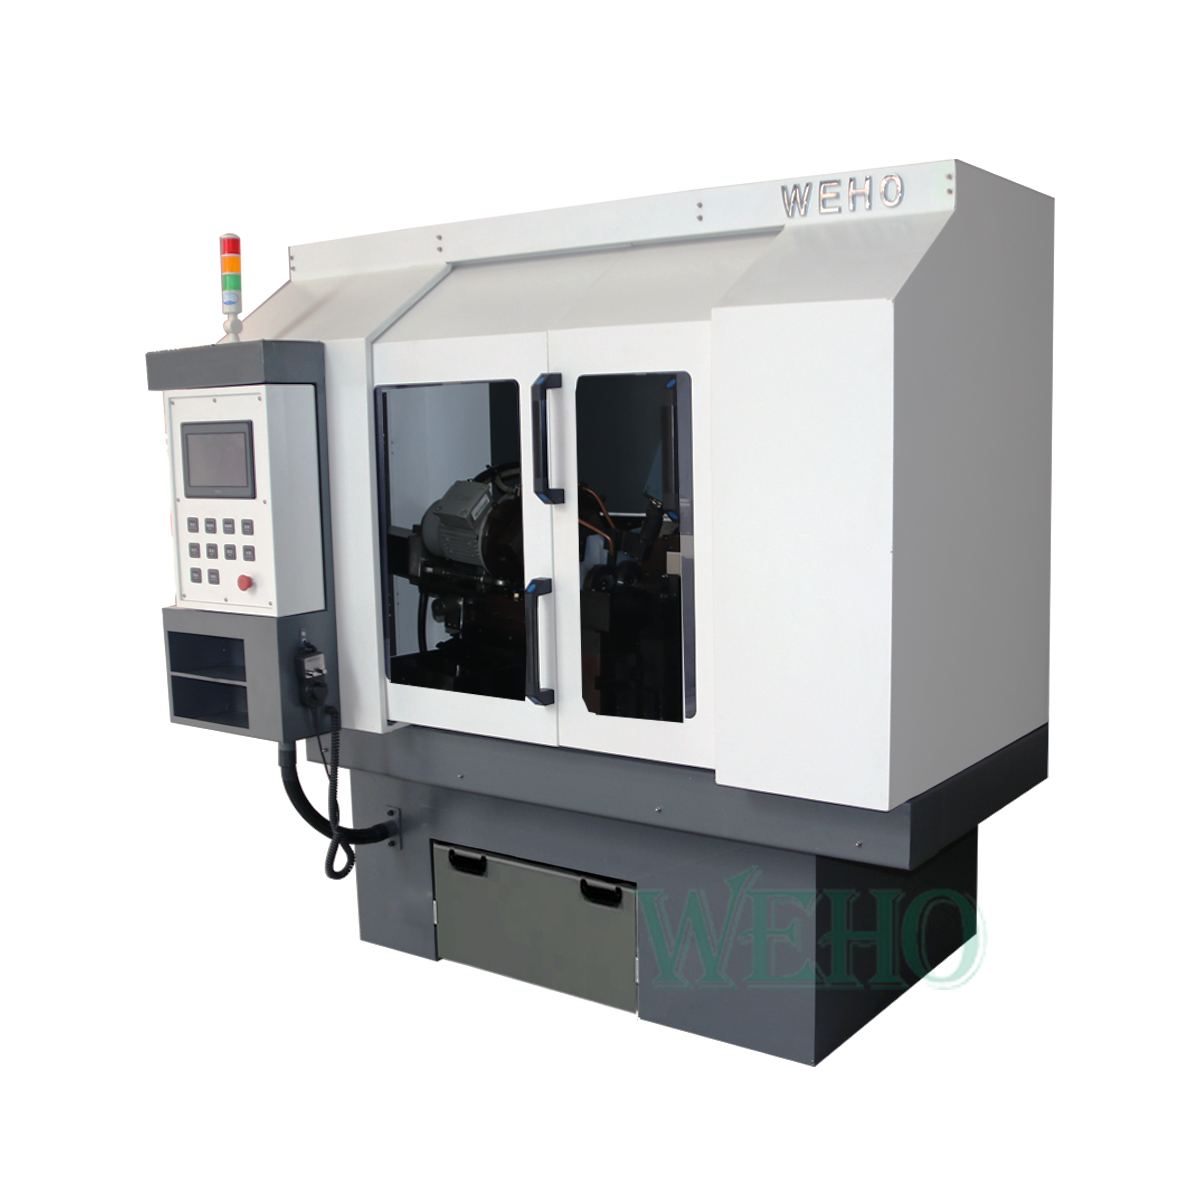 Automatic dual double flank side grinder TCT circular carbide teeth saw blade grinding machine